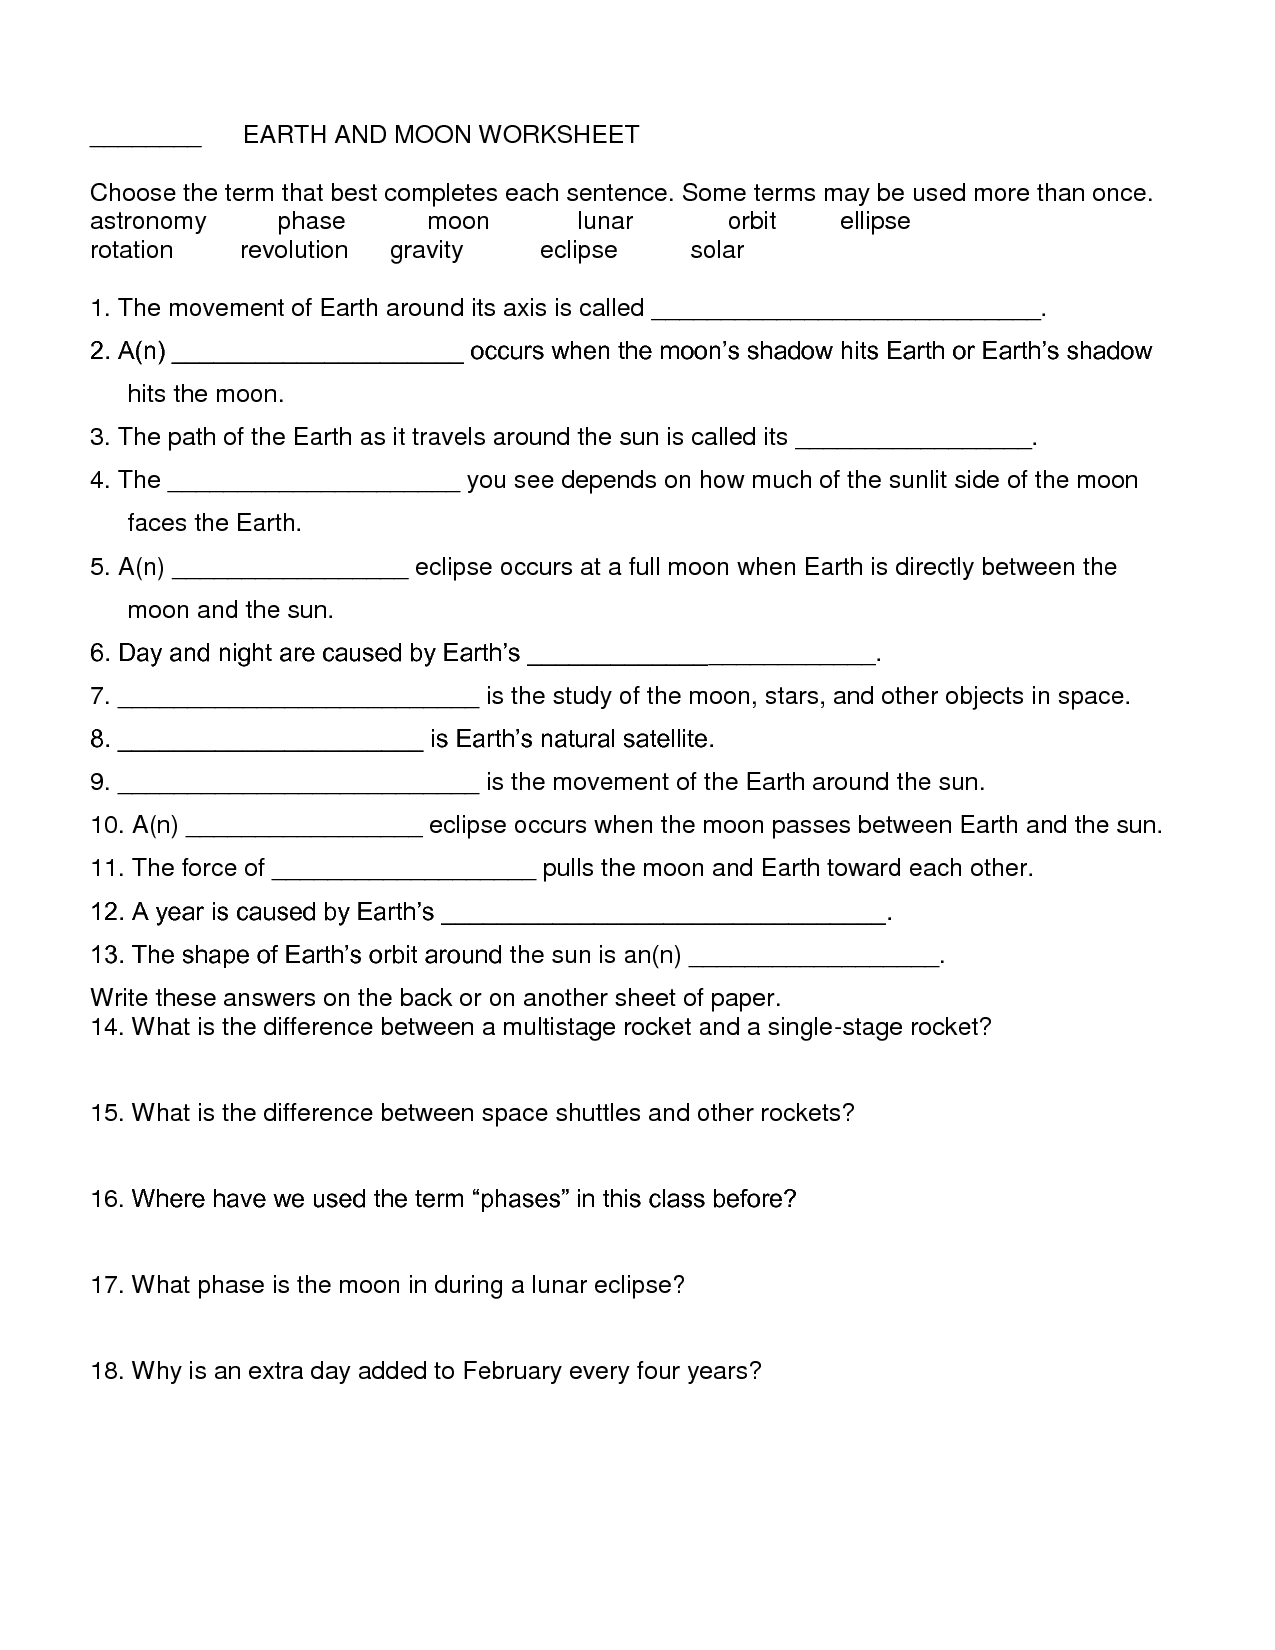 Earth-Sun and Moon Worksheets Image